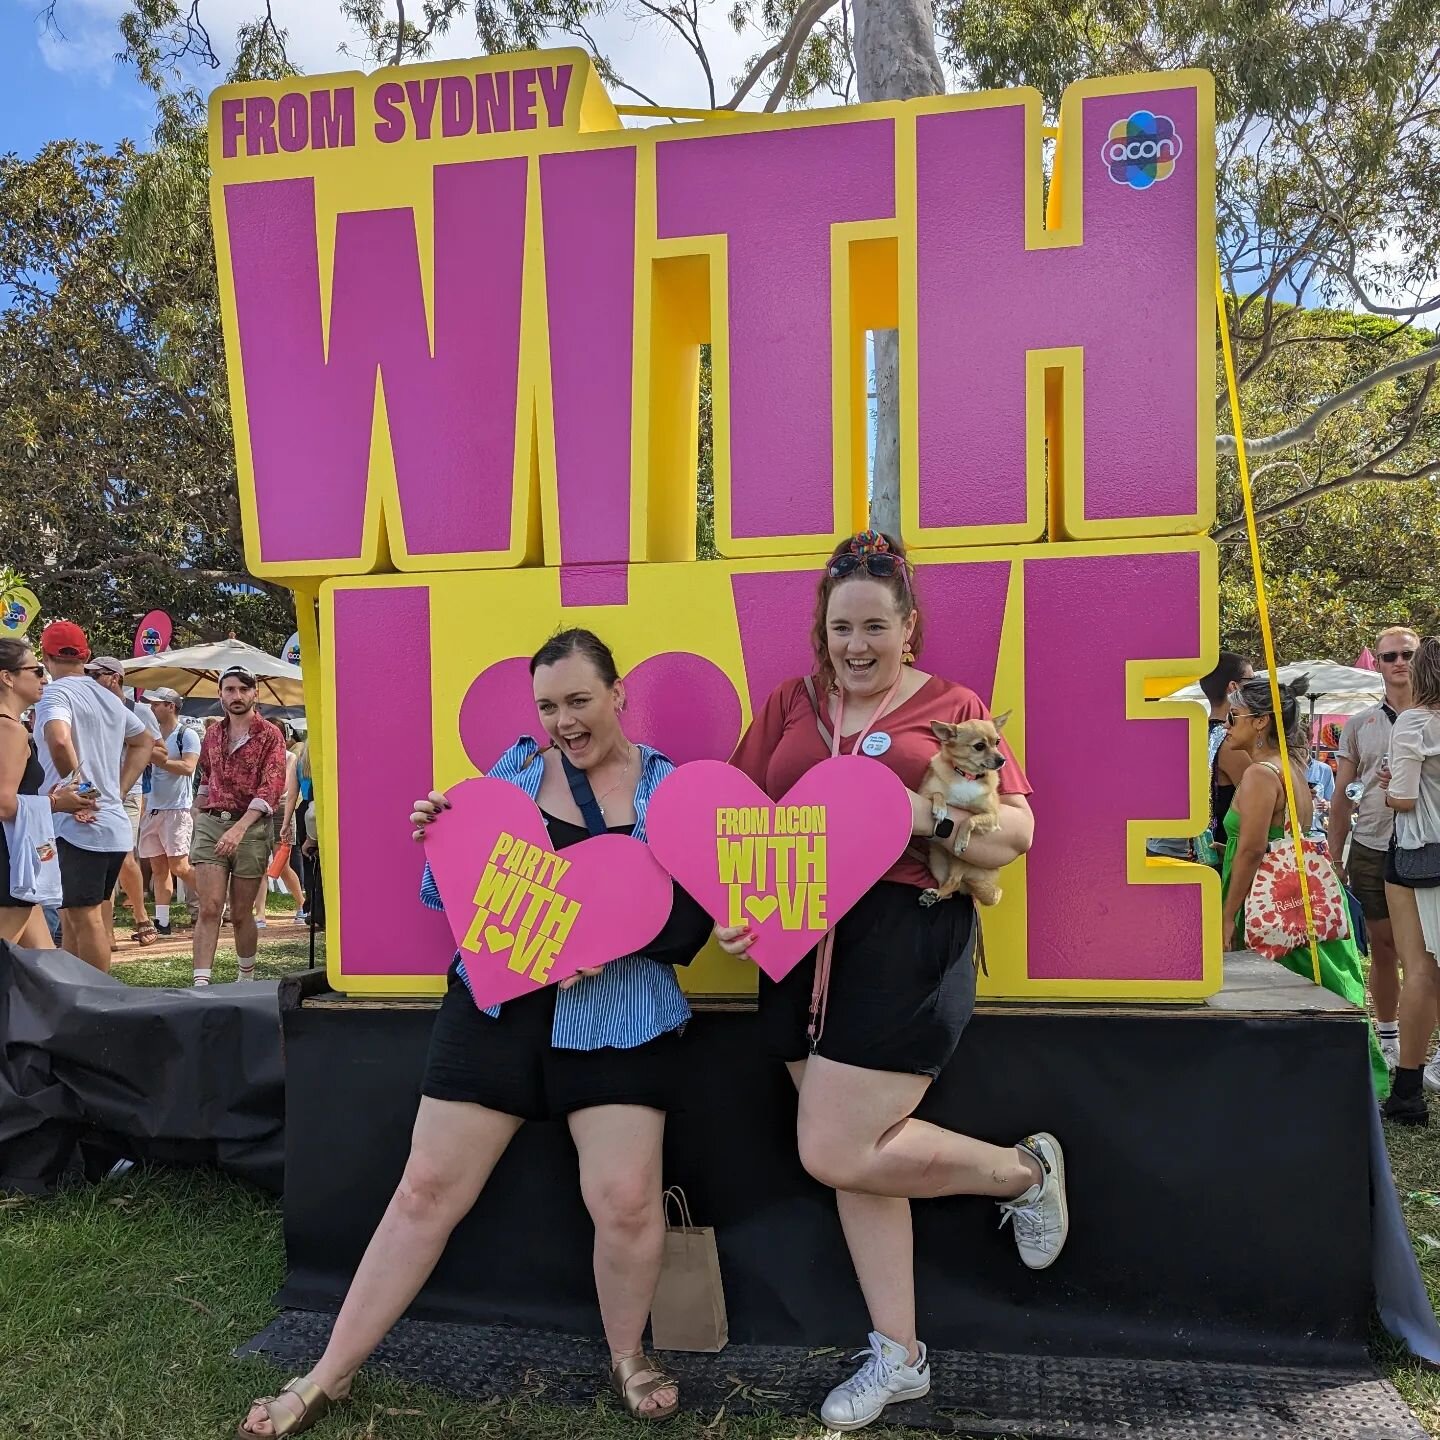 HAPPY WORLD PRIDE, Y'ALL! 🏳️&zwj;🌈🏳️&zwj;⚧️

And on that subject... How do you know if your wedding vendors are actually allies, and not just rainbow washing to get bookings? Well, you'll find us at places like @sydneymardigras Fair Day! We'll be 